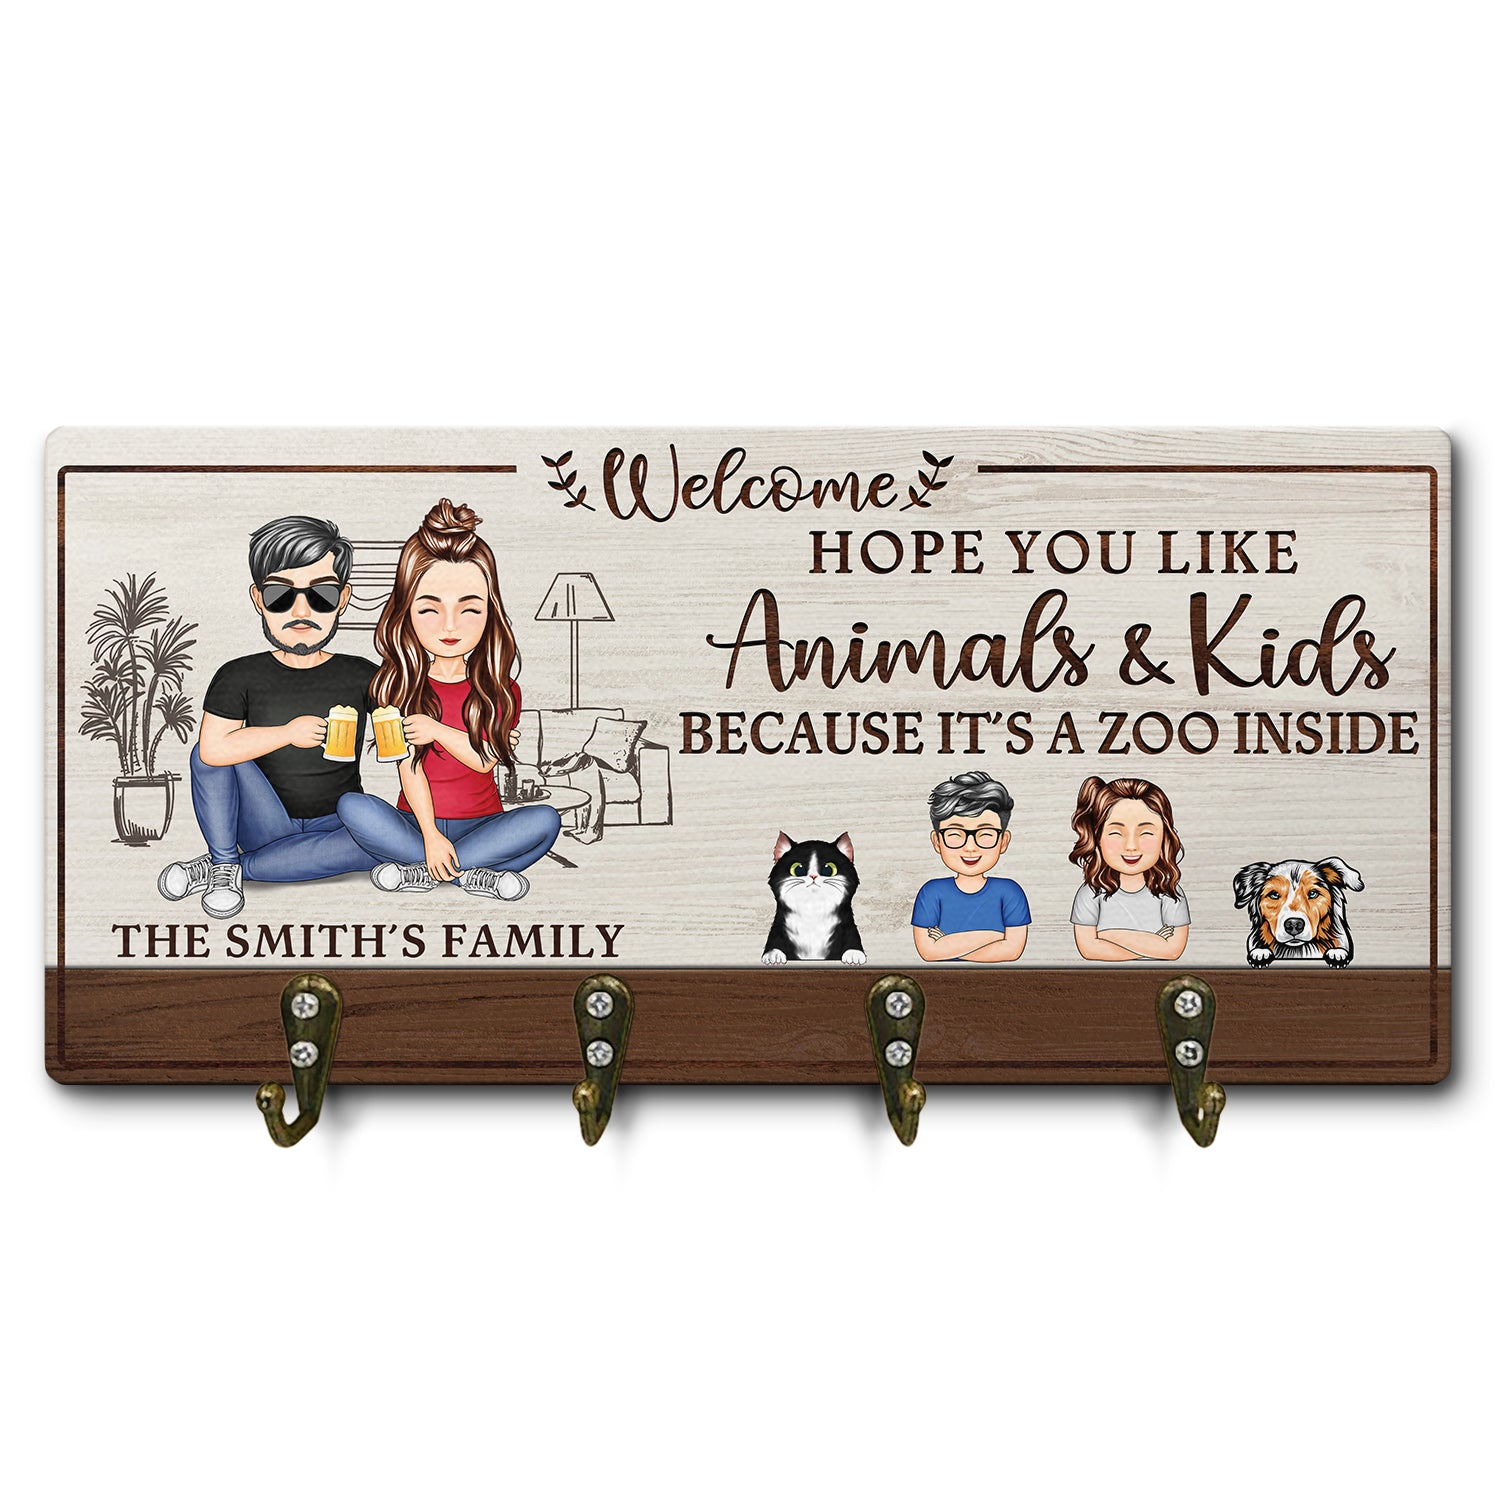 Hope You Like Animals And Kids - Home Decor Gift For Family, Husband, Wife, Couple - Personalized Wood Key Holder